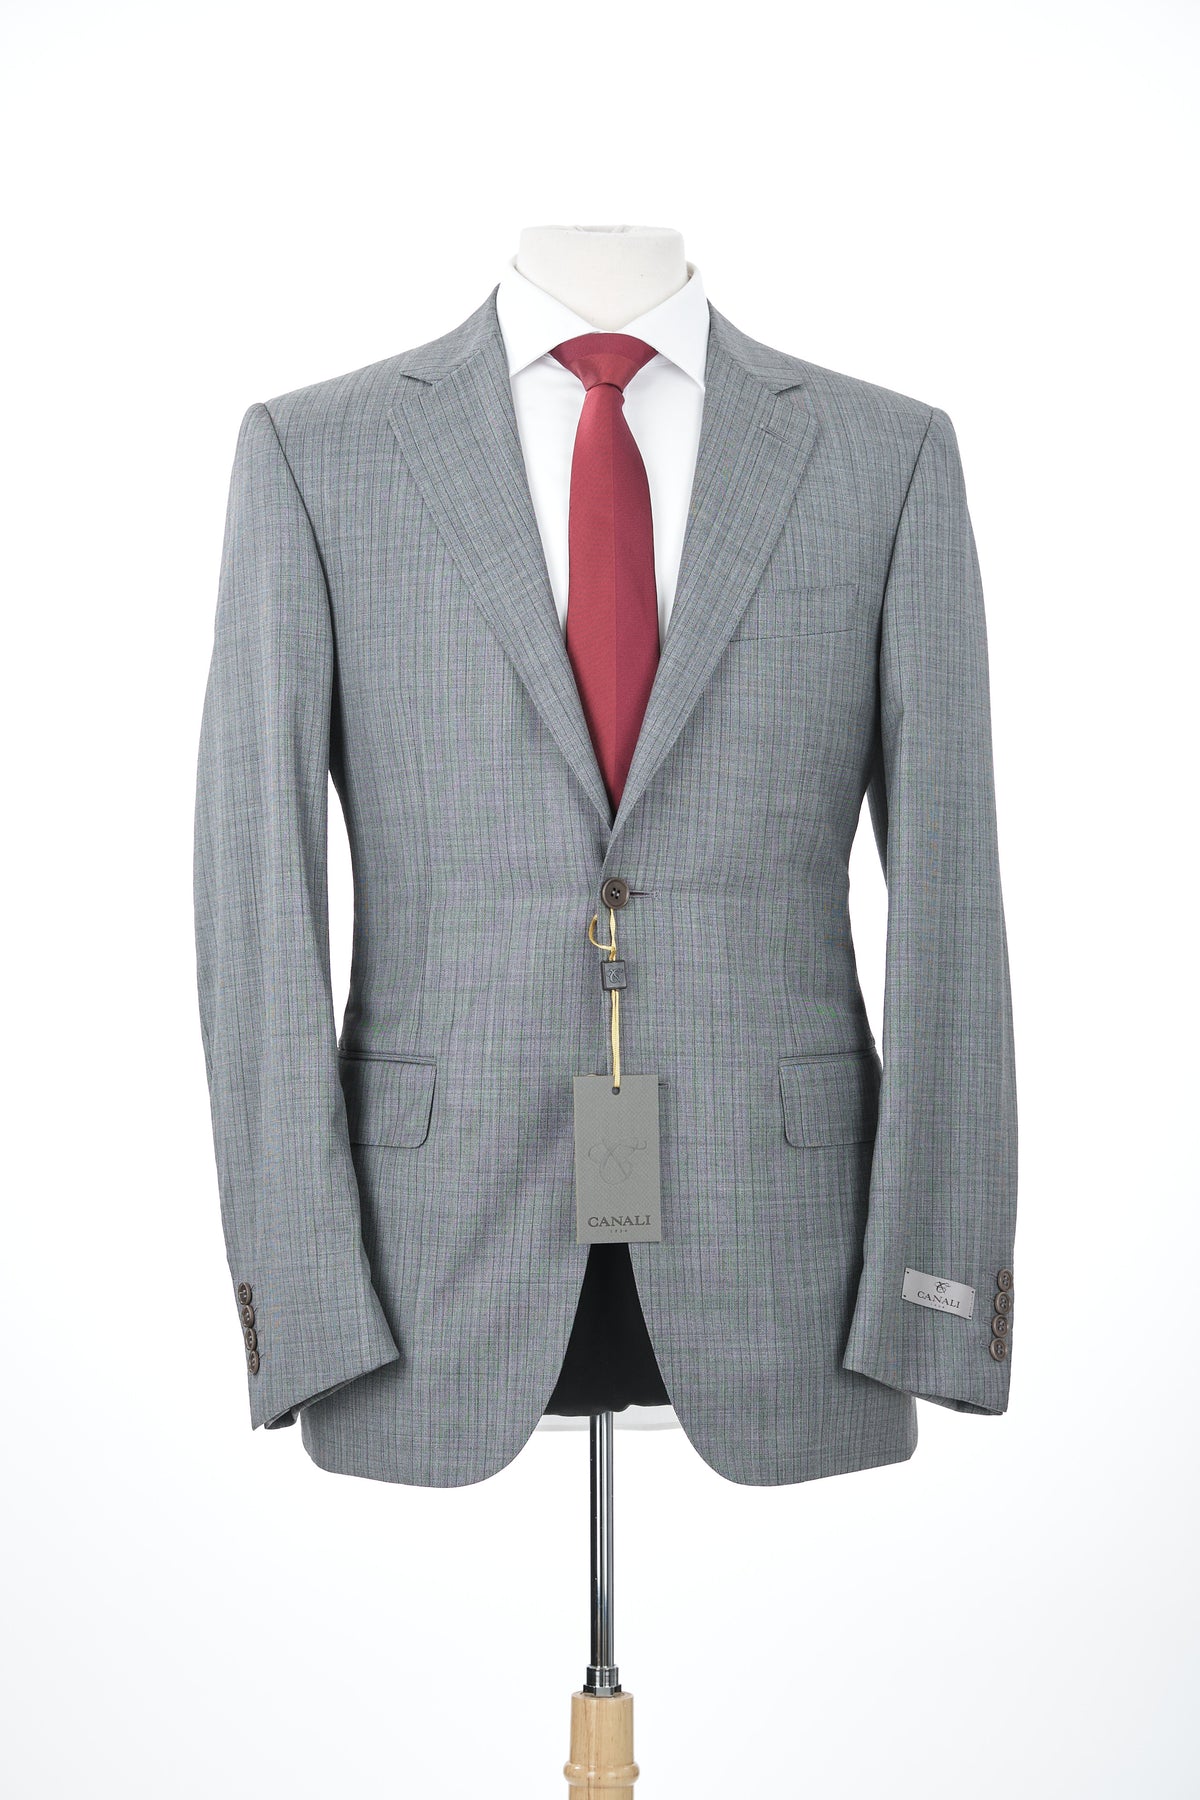 Canali 1934 Mens Light Gray Striped 44R Drop 7 100% Wool 2 Button 2 Piece Suit